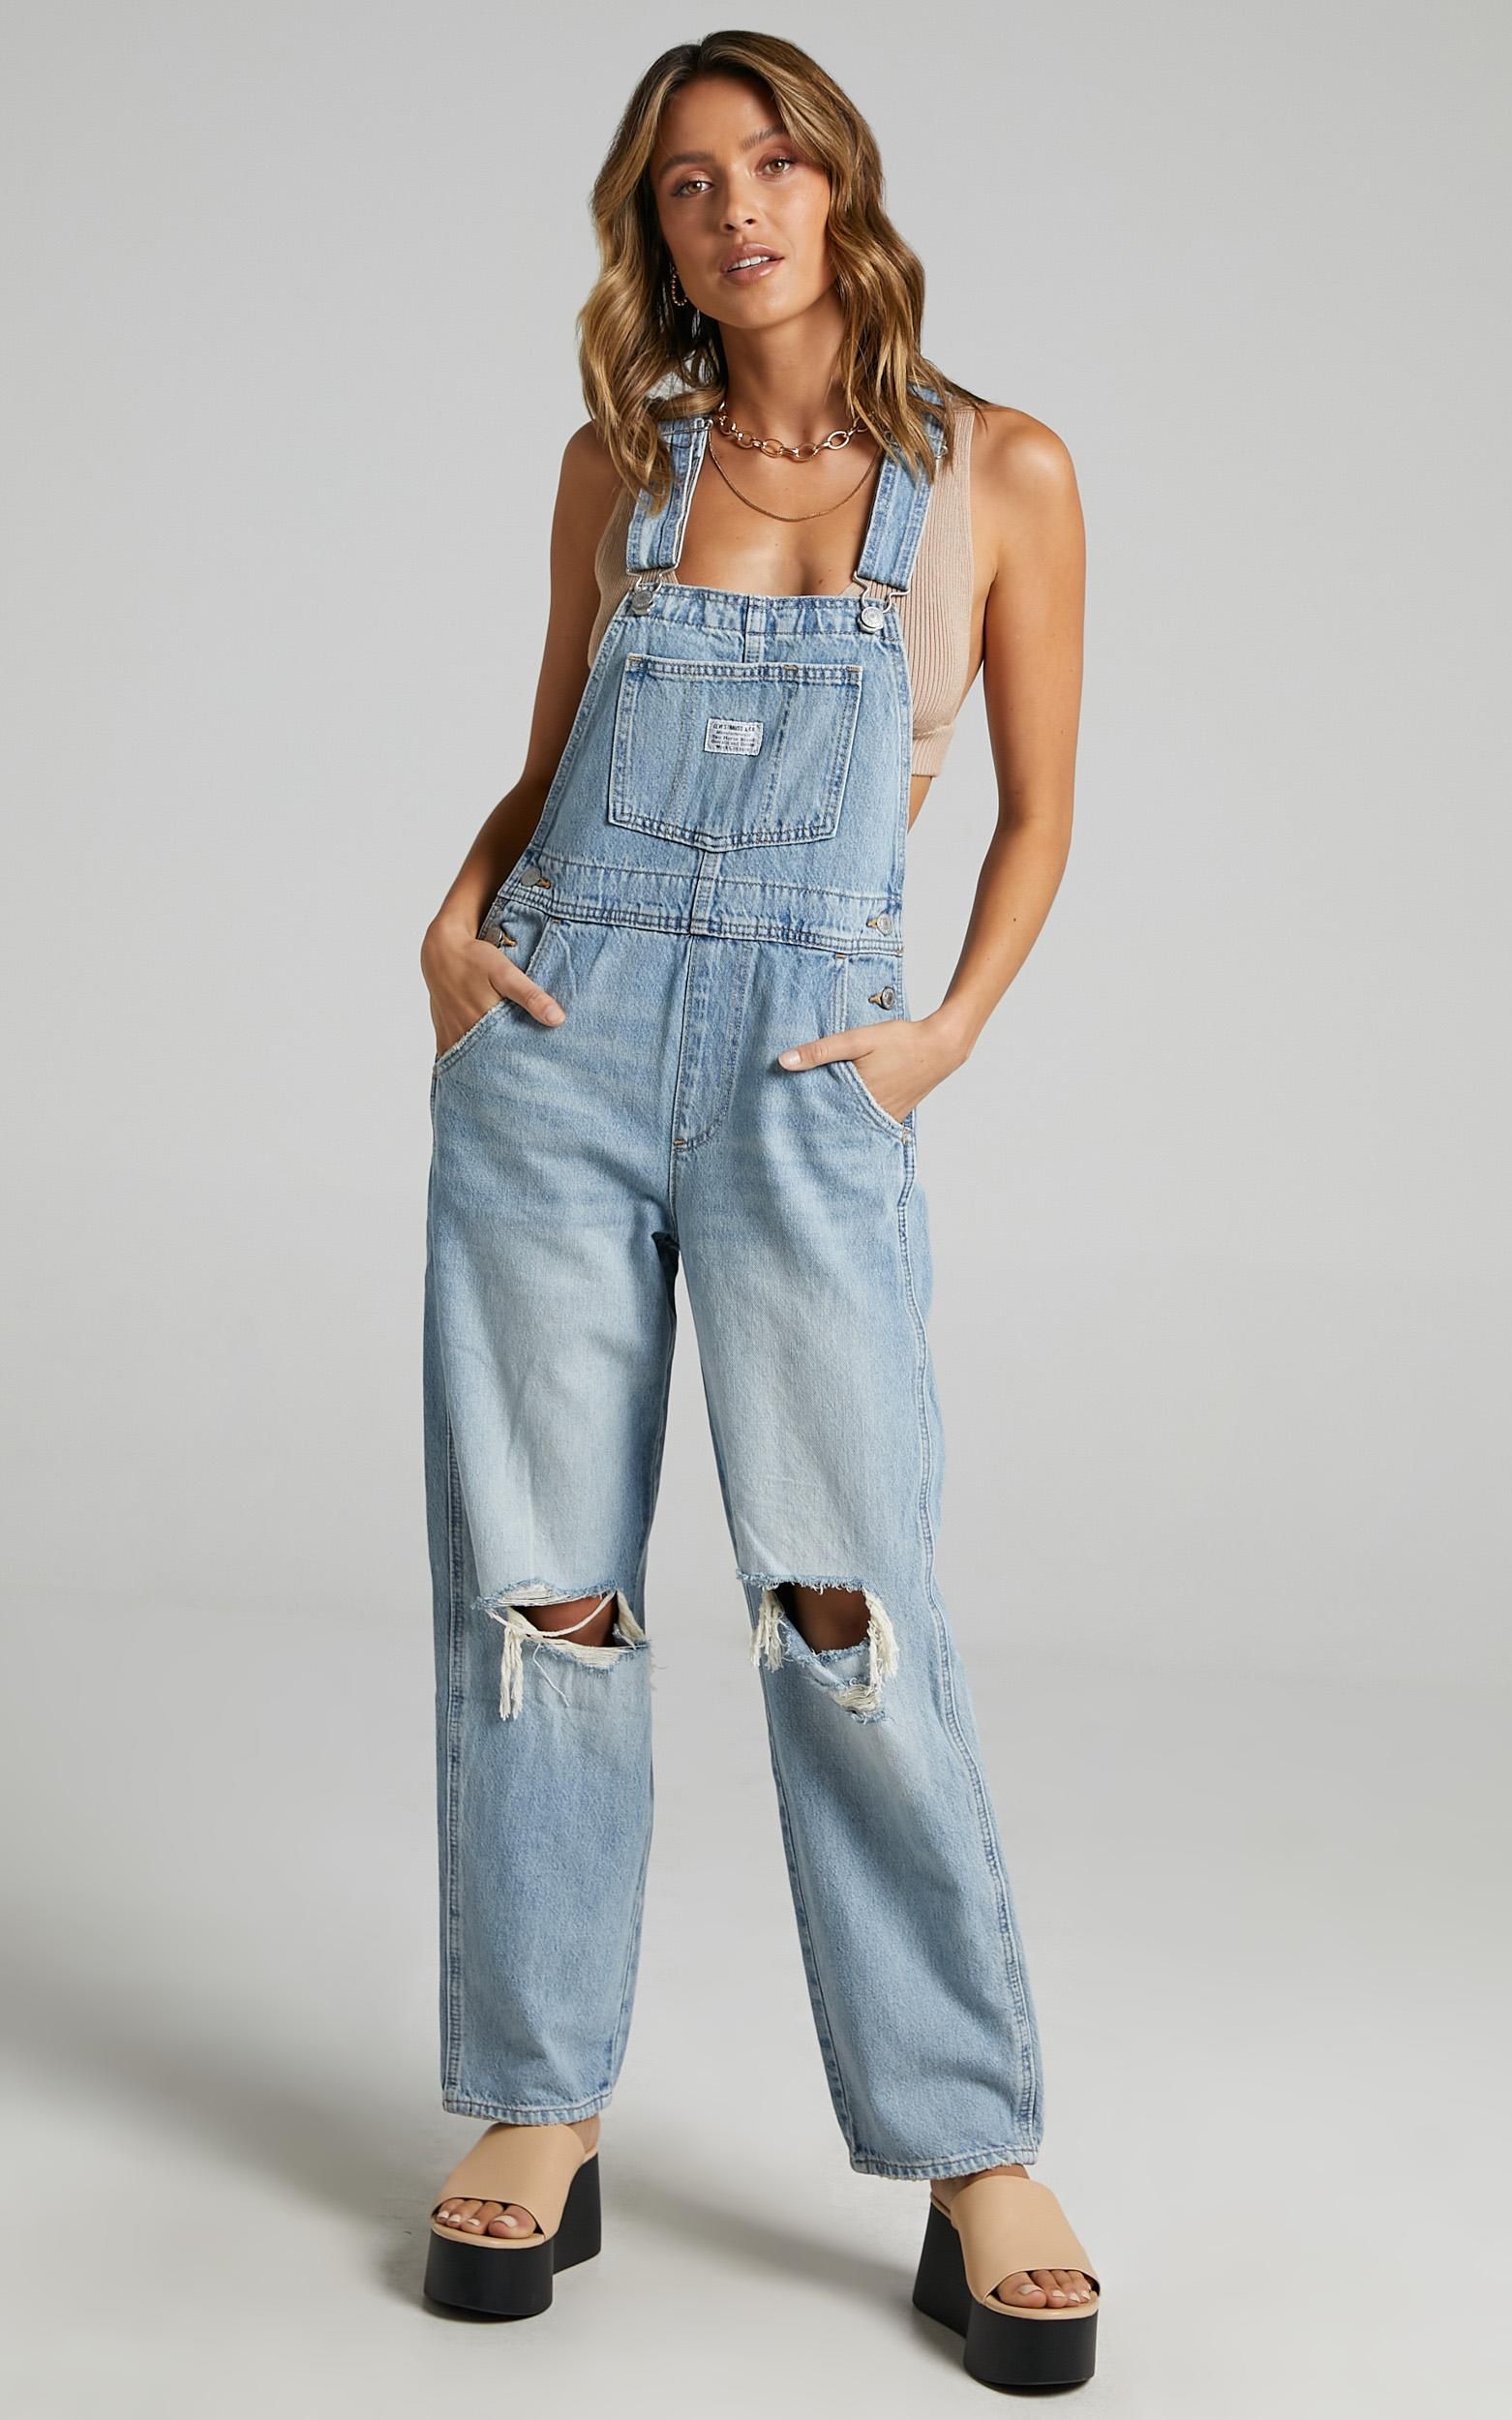 LEVIS - VINTAGE OVERALL IN BRIGHT LIGHT | Showpo - deactived